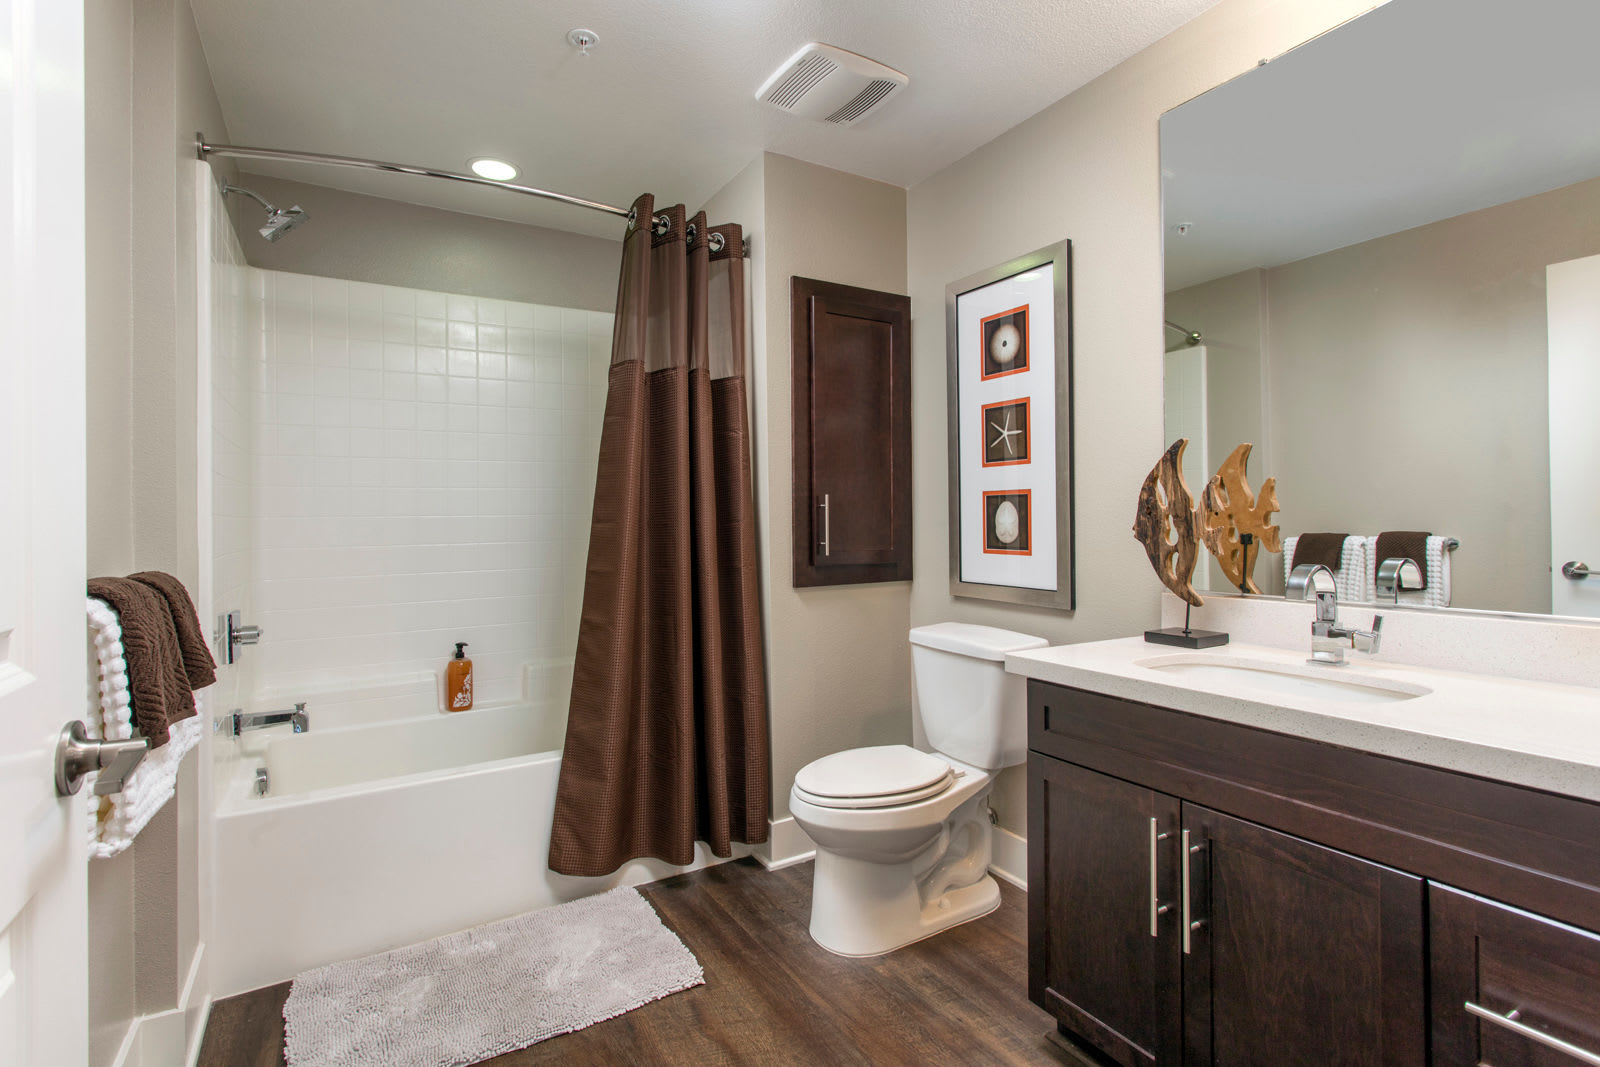 Bathroom at The Boulevard Apartment Homes in Woodland Hills, California